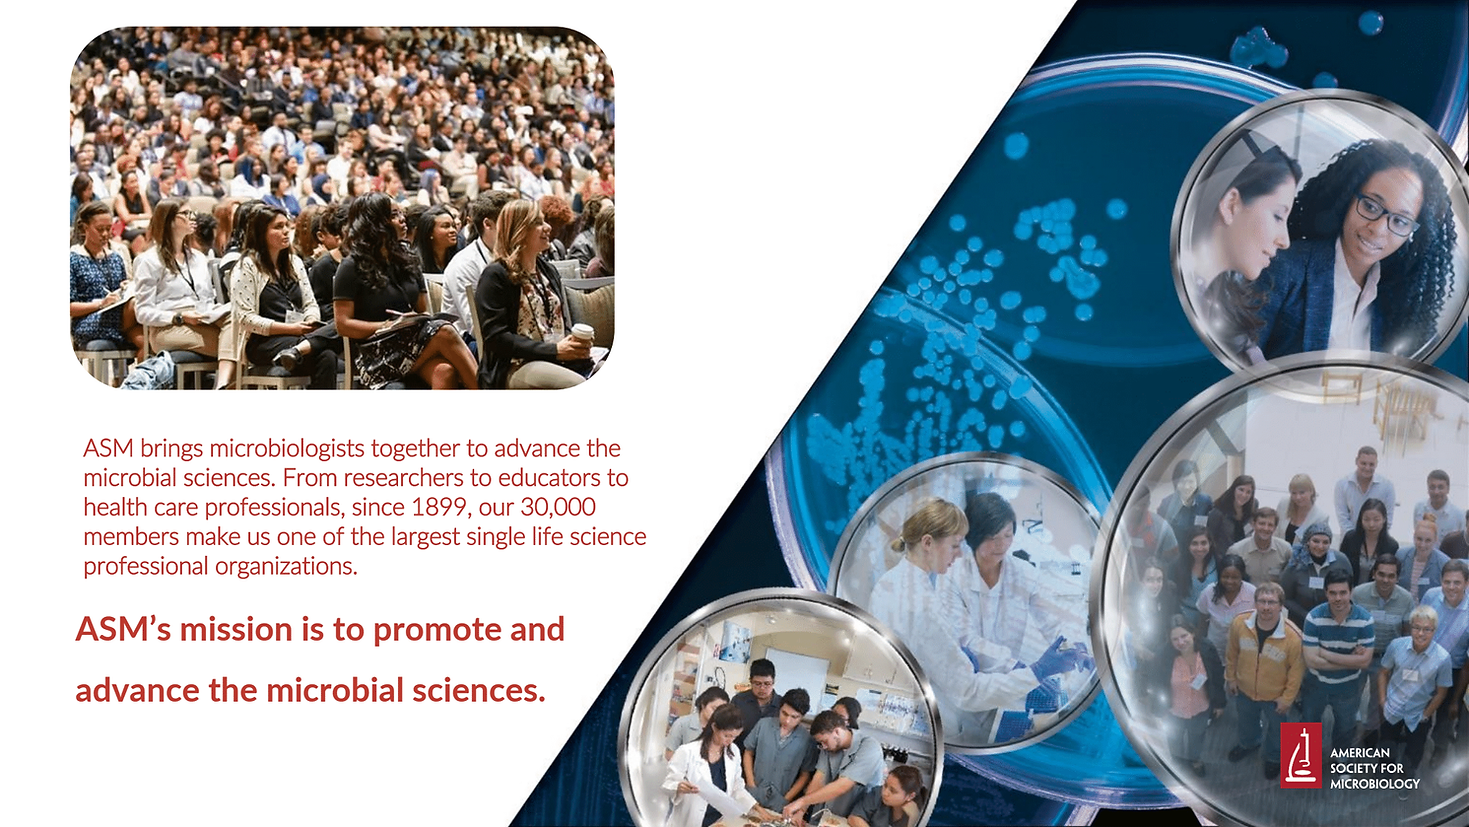 Text:  ASM brings microbiologists together to advance the microbial sciences. From researchers to educators to health care professionals, since 1899, our 30,000 members make us one of the largest single life science professional organizations. ASM's mission is to promote and advance microbial sciences. Picture of a crowd top left. Image of the right of petri dishes with various pictures of people inside the petri dishes. ASM logo at bottom right, which is the words and a microscope.